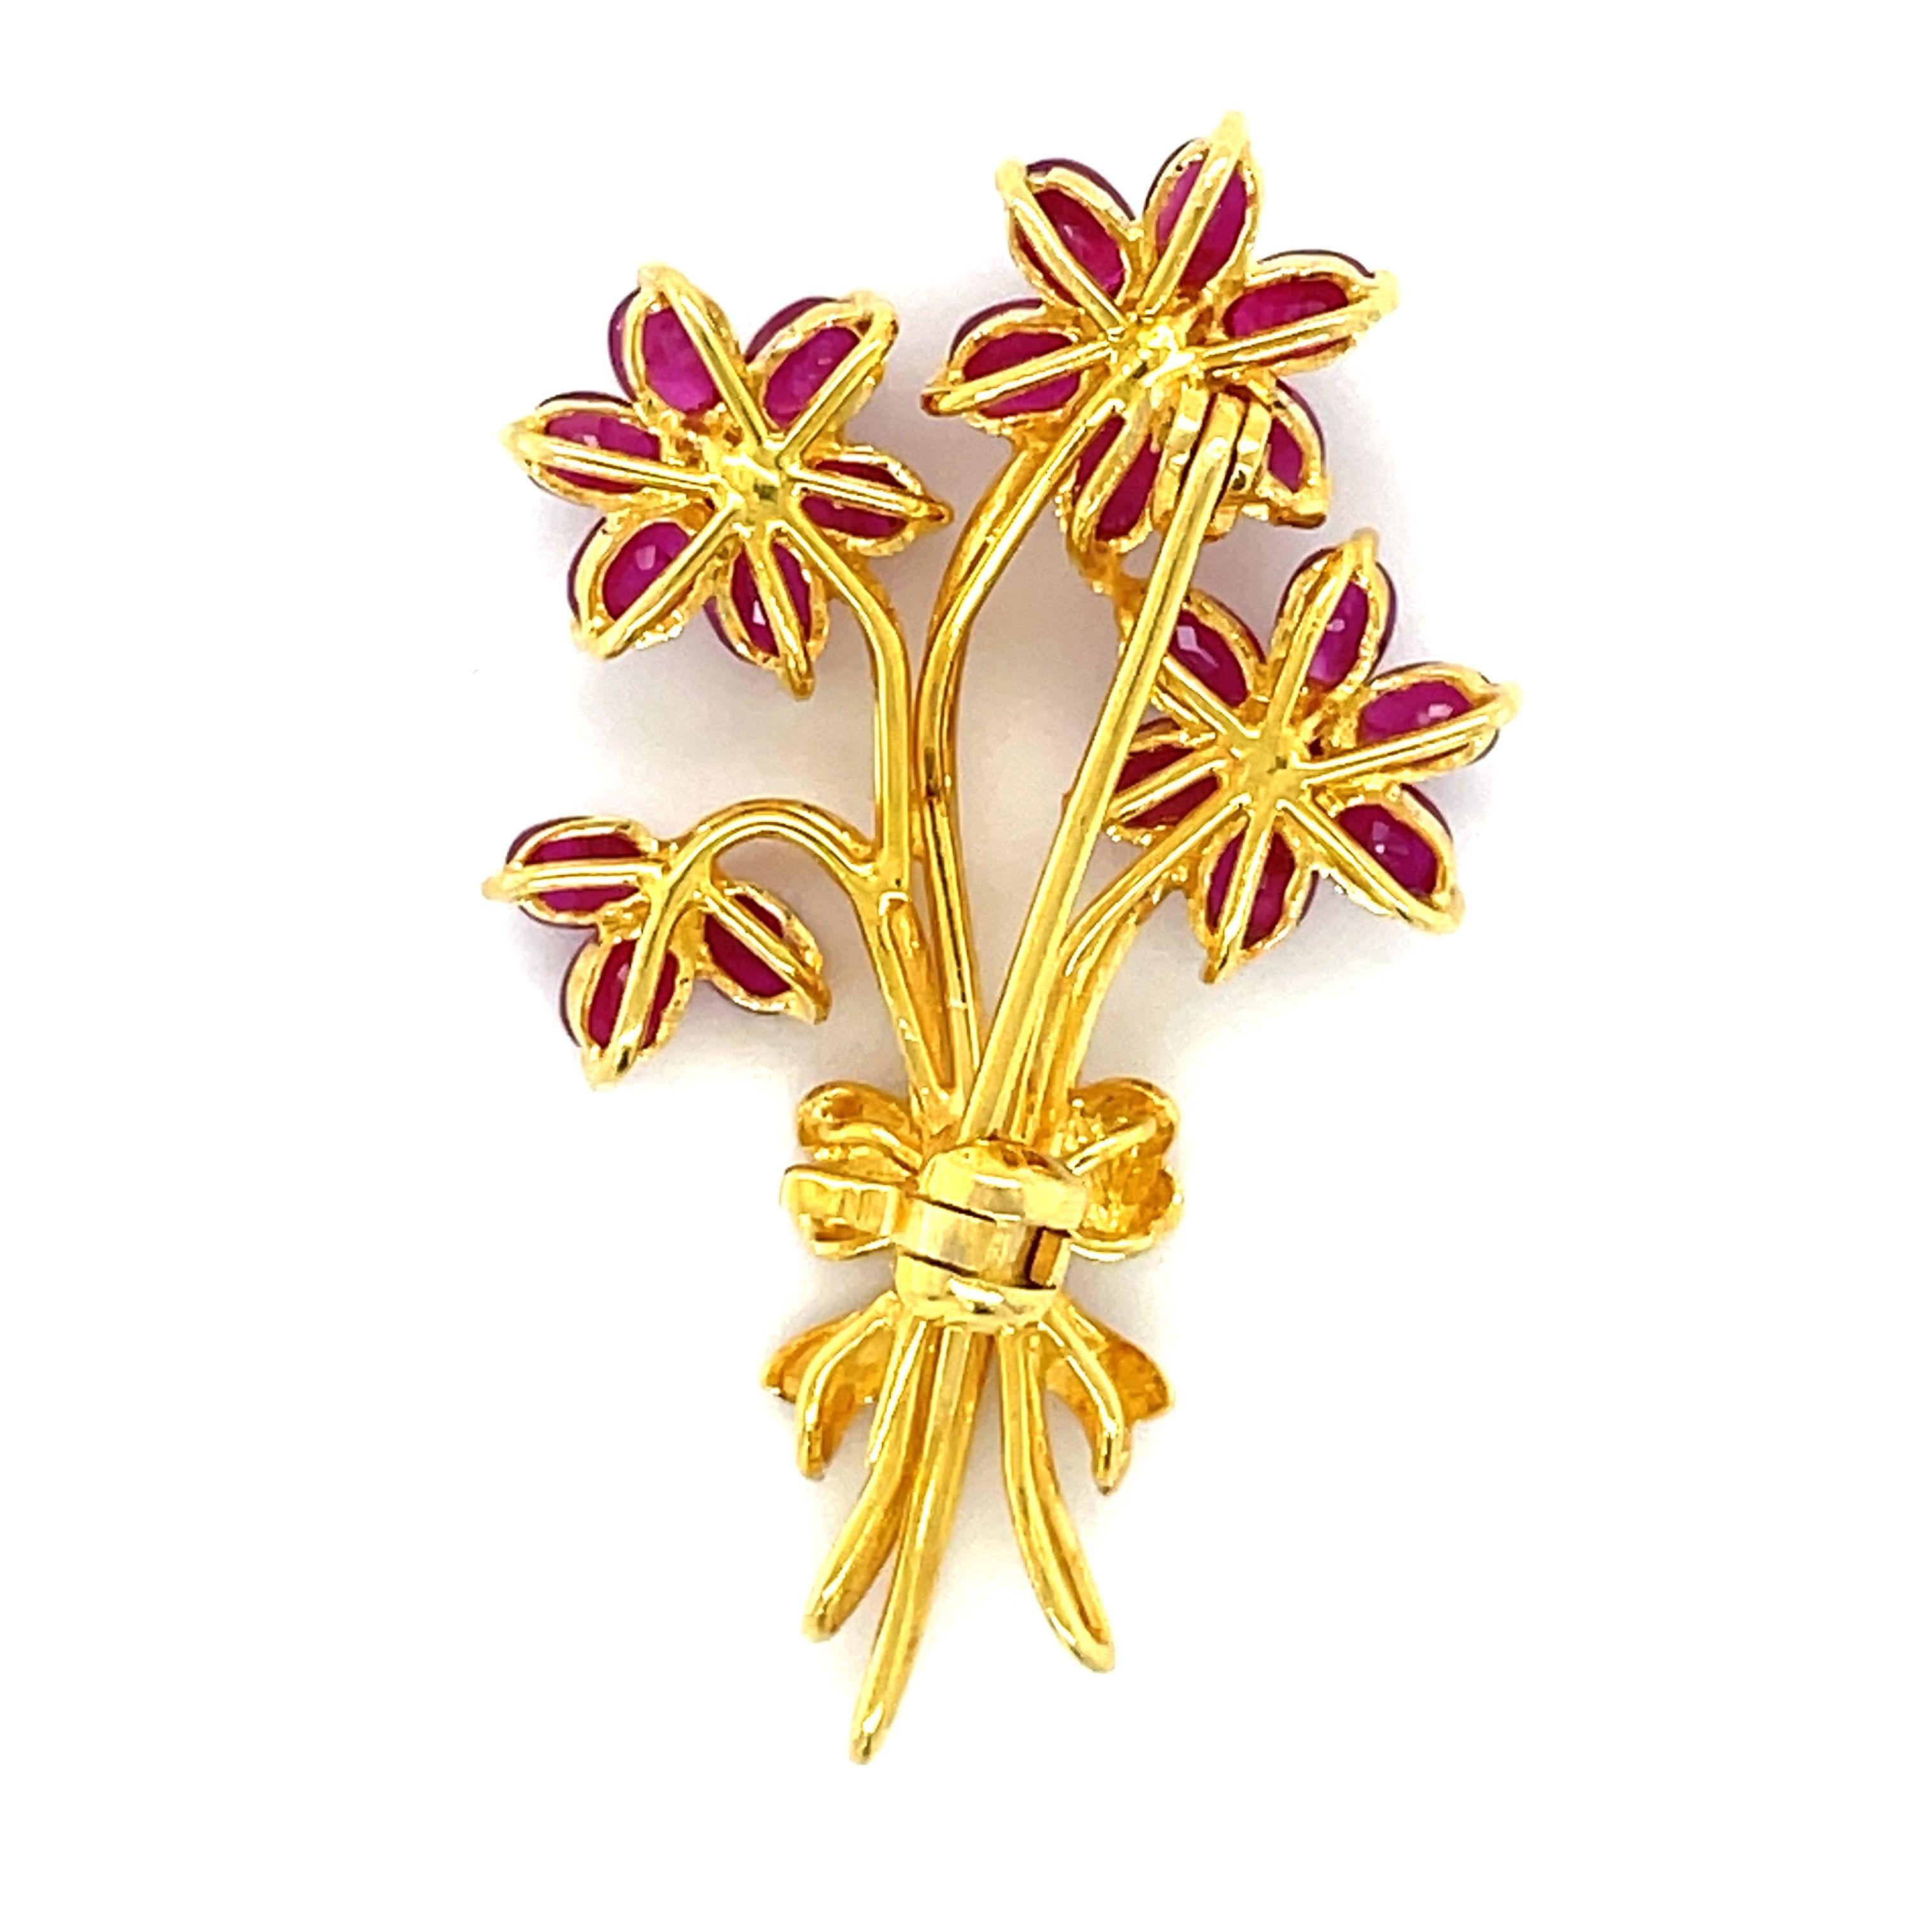 Vintage Flowers Brooch, 22k Yellow Gold, 2 Carat Natural Ruby Estate Ruby Brooch For Sale 1